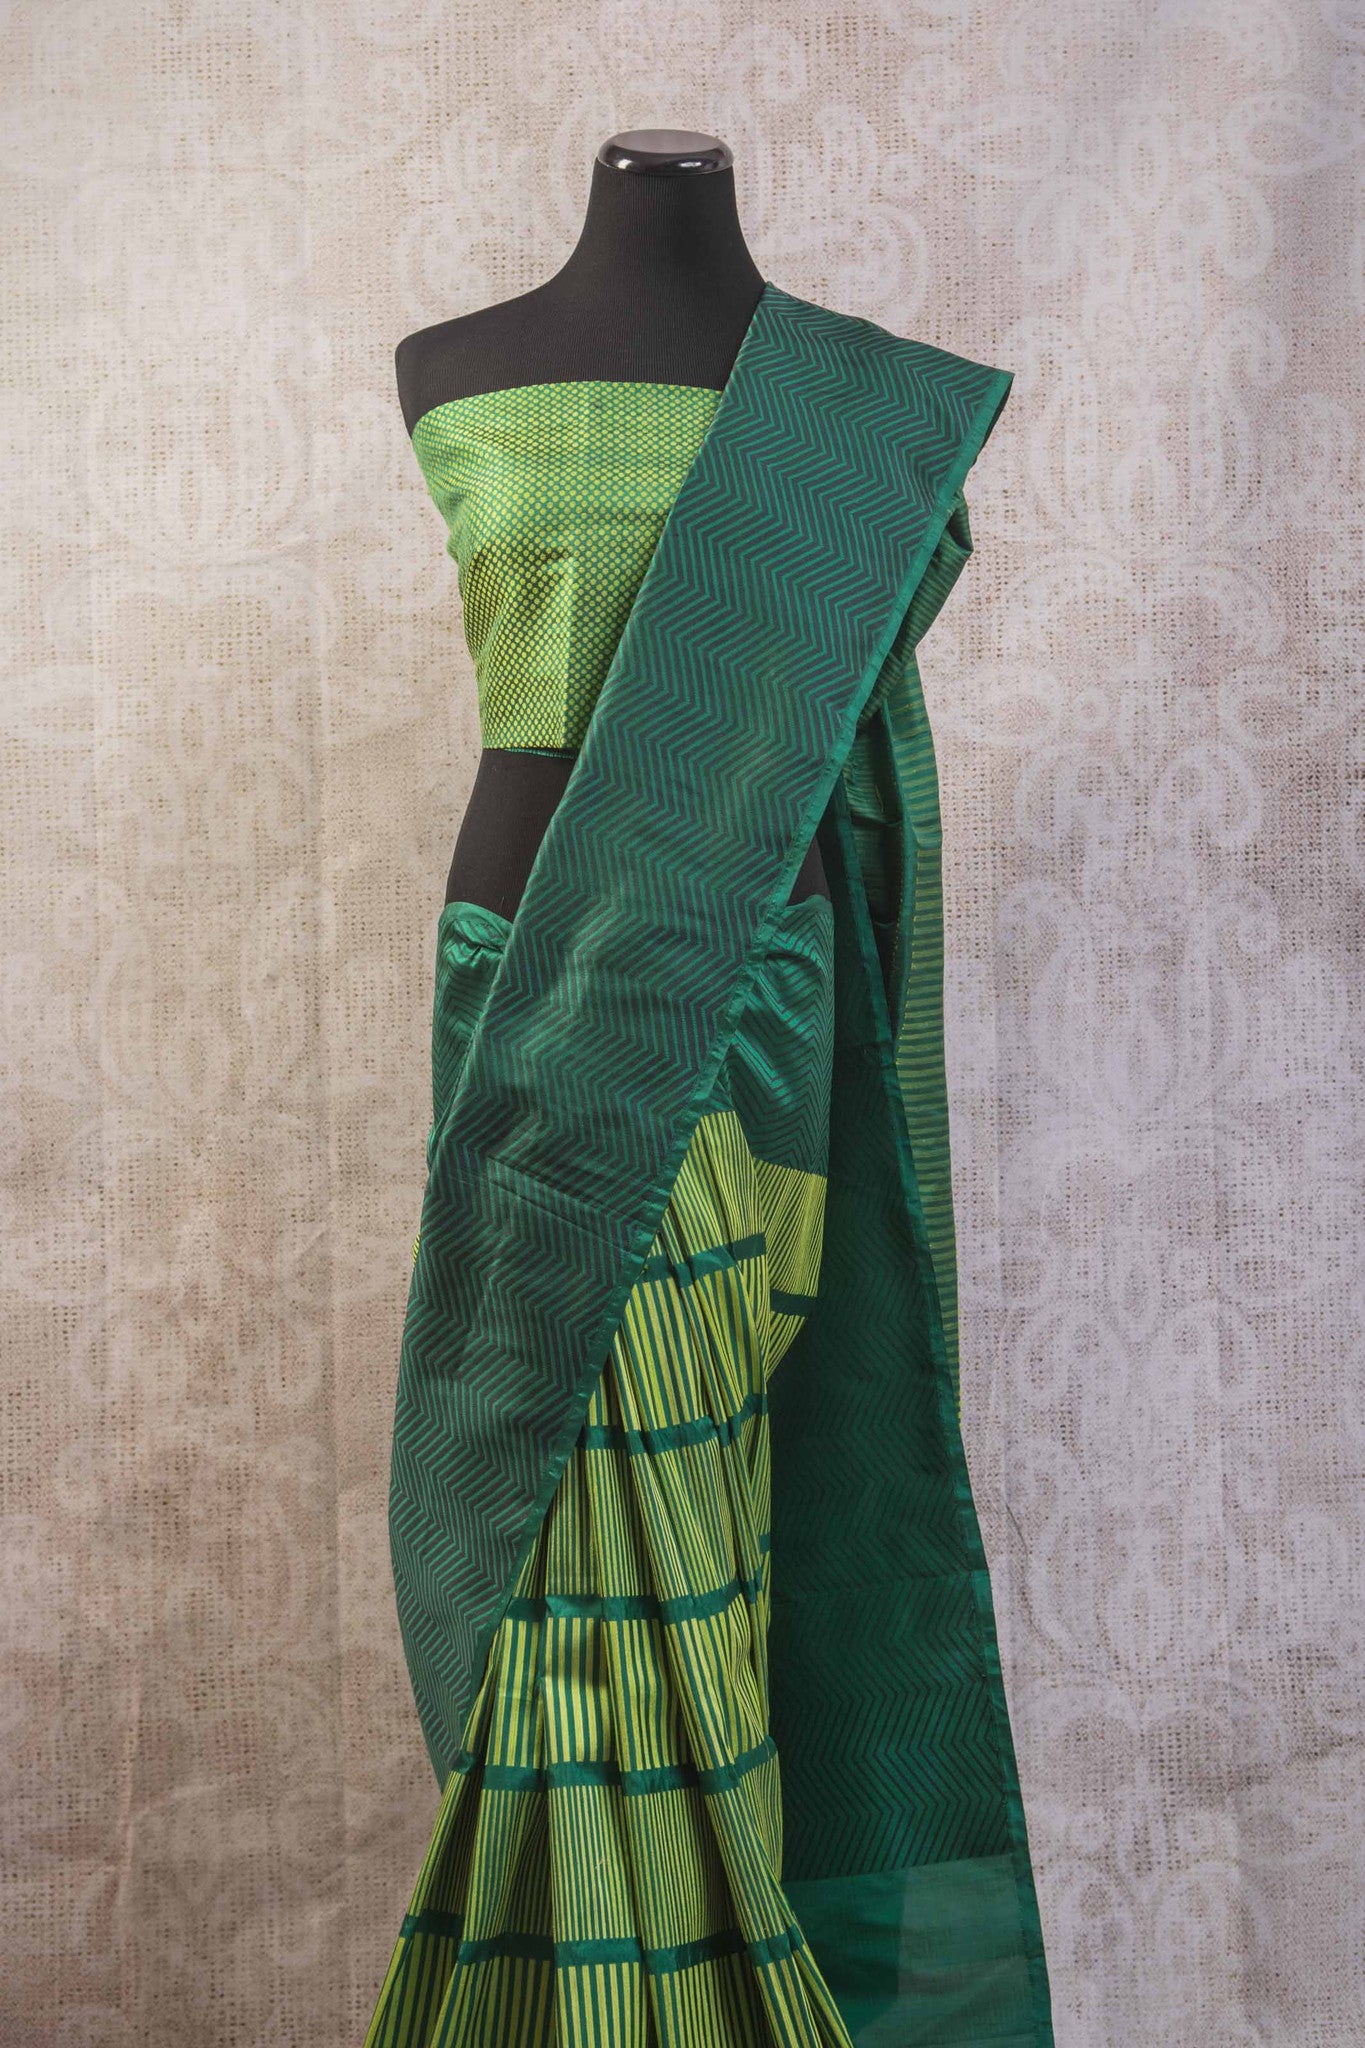 90b256 Multi green Banarasi silk saree from India with zig zag stripes & satin black pallu. The simple sari is available at our Indian wear store in USA, Pure Elegance. This one is perfect for parties, get-togethers and pujas.